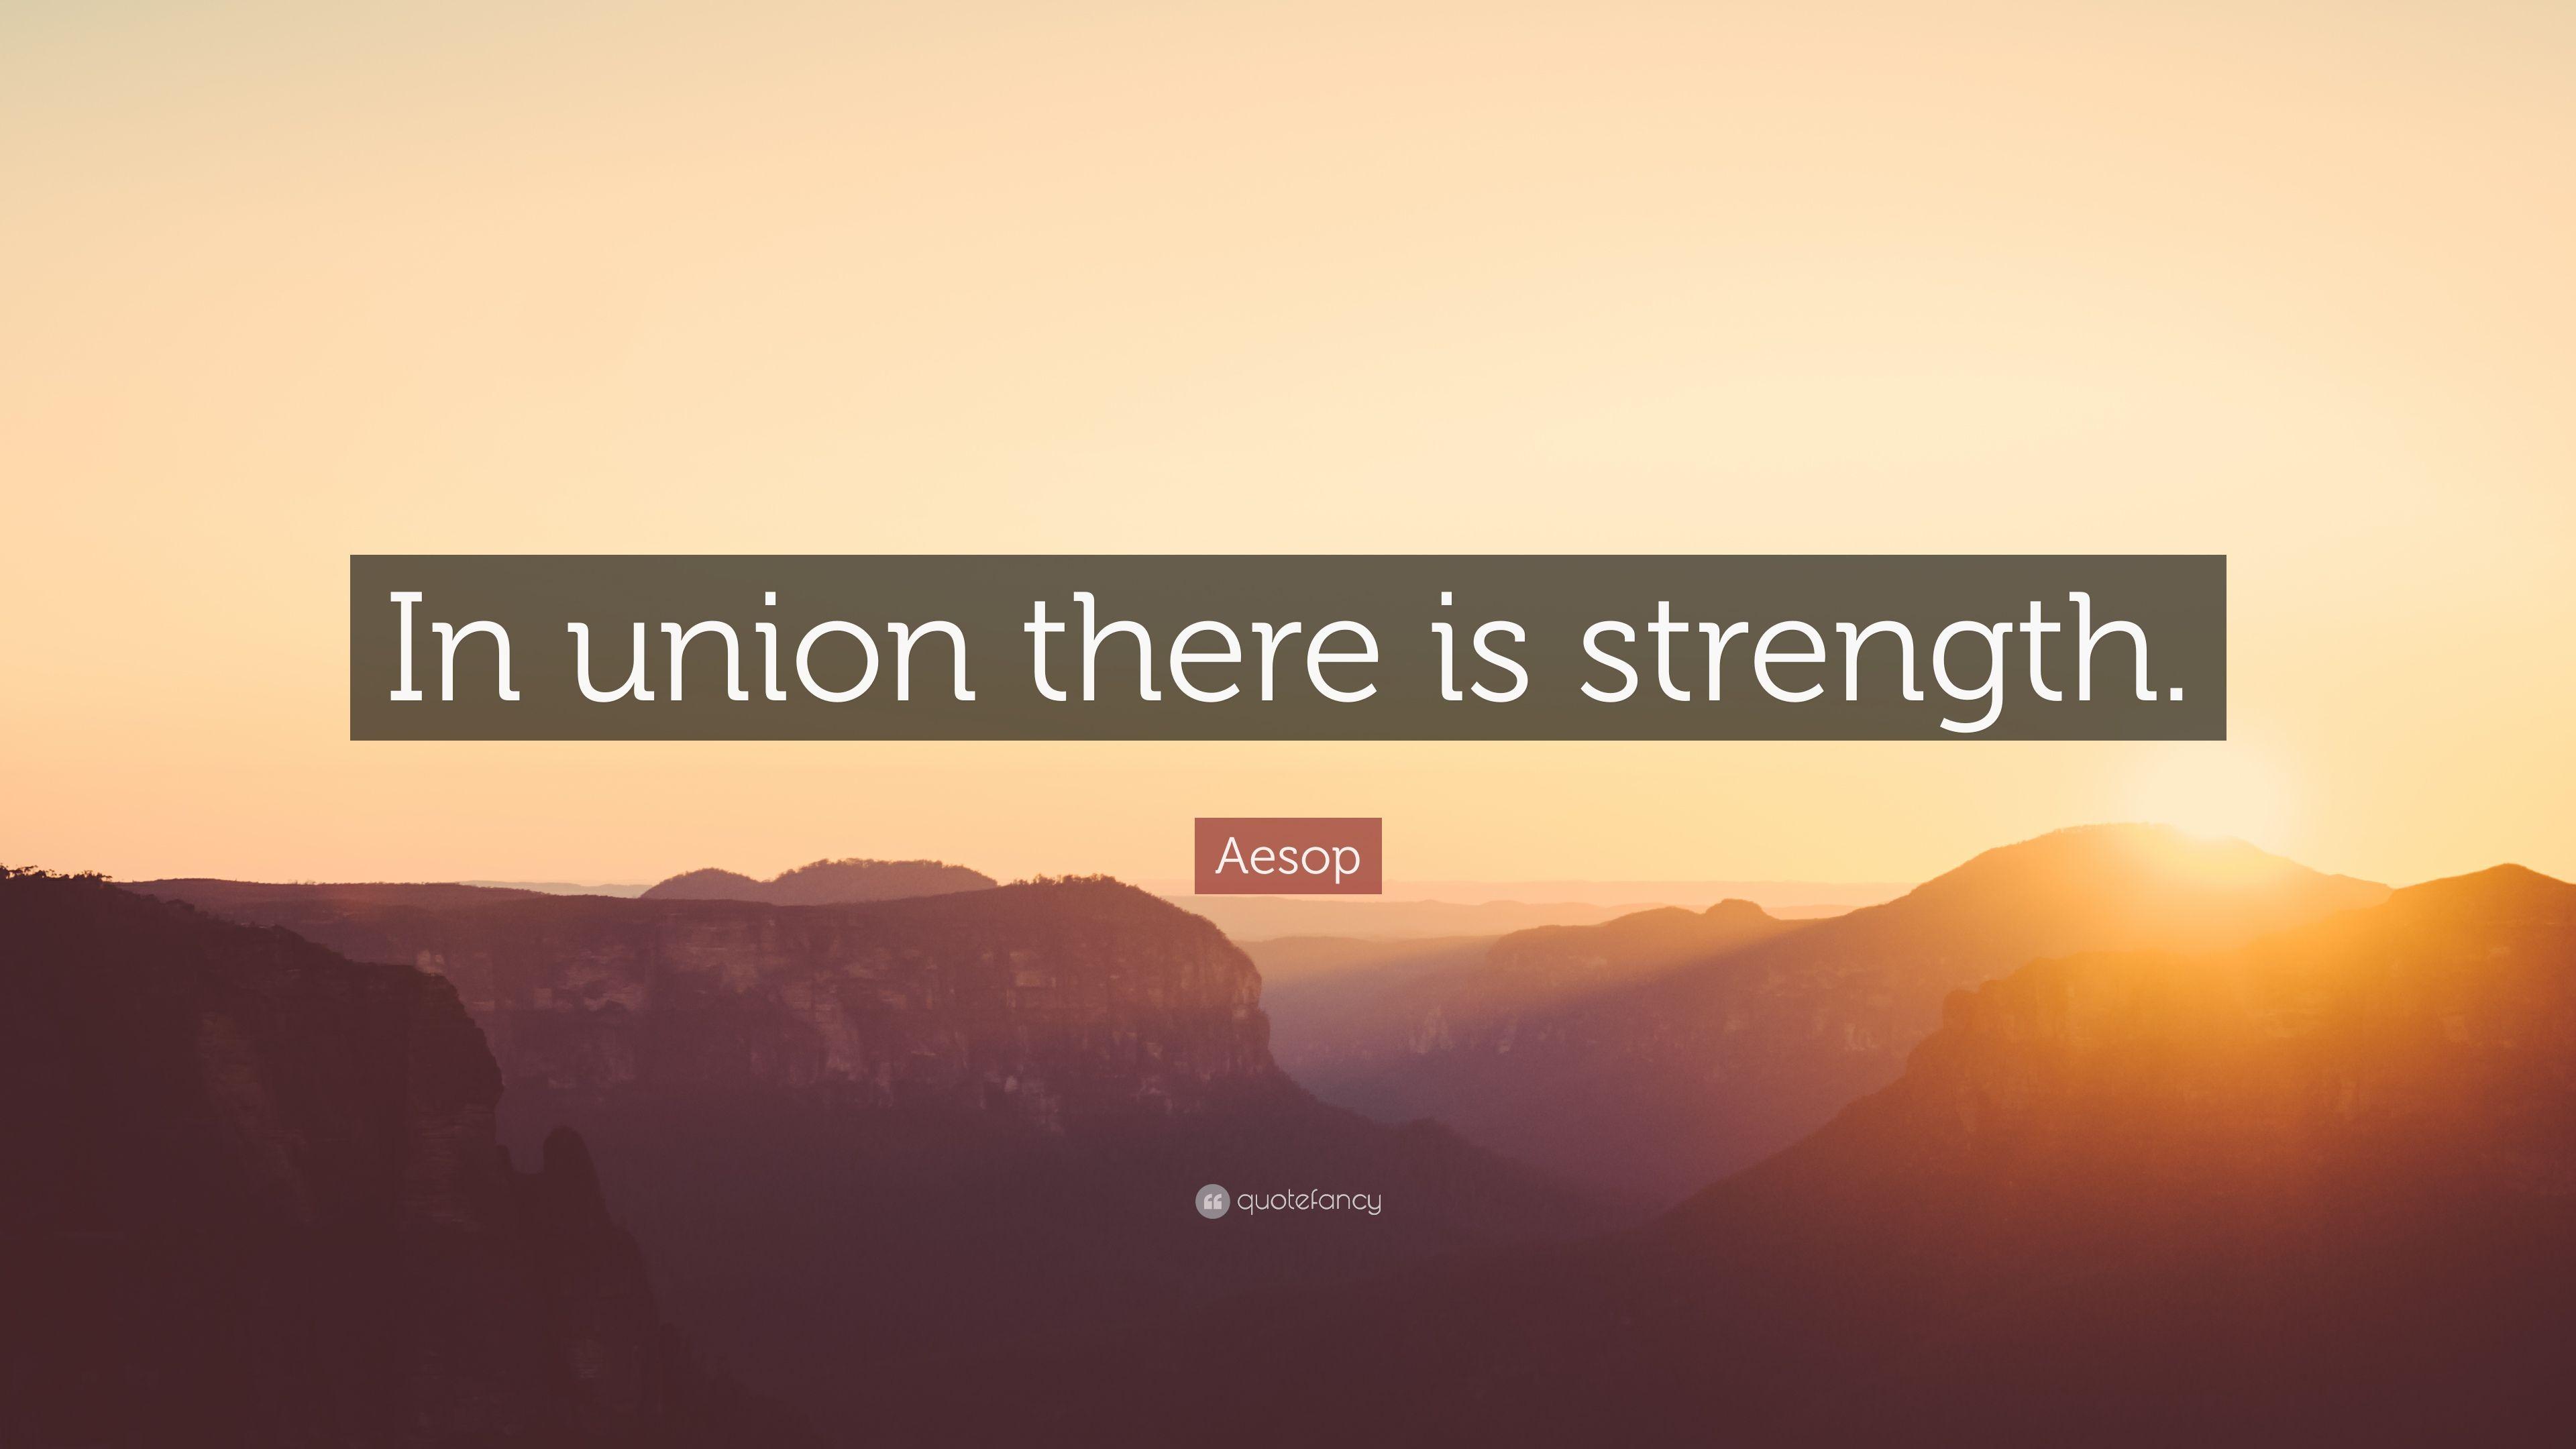 Aesop Quote: “In union there is strength.” 10 wallpaper